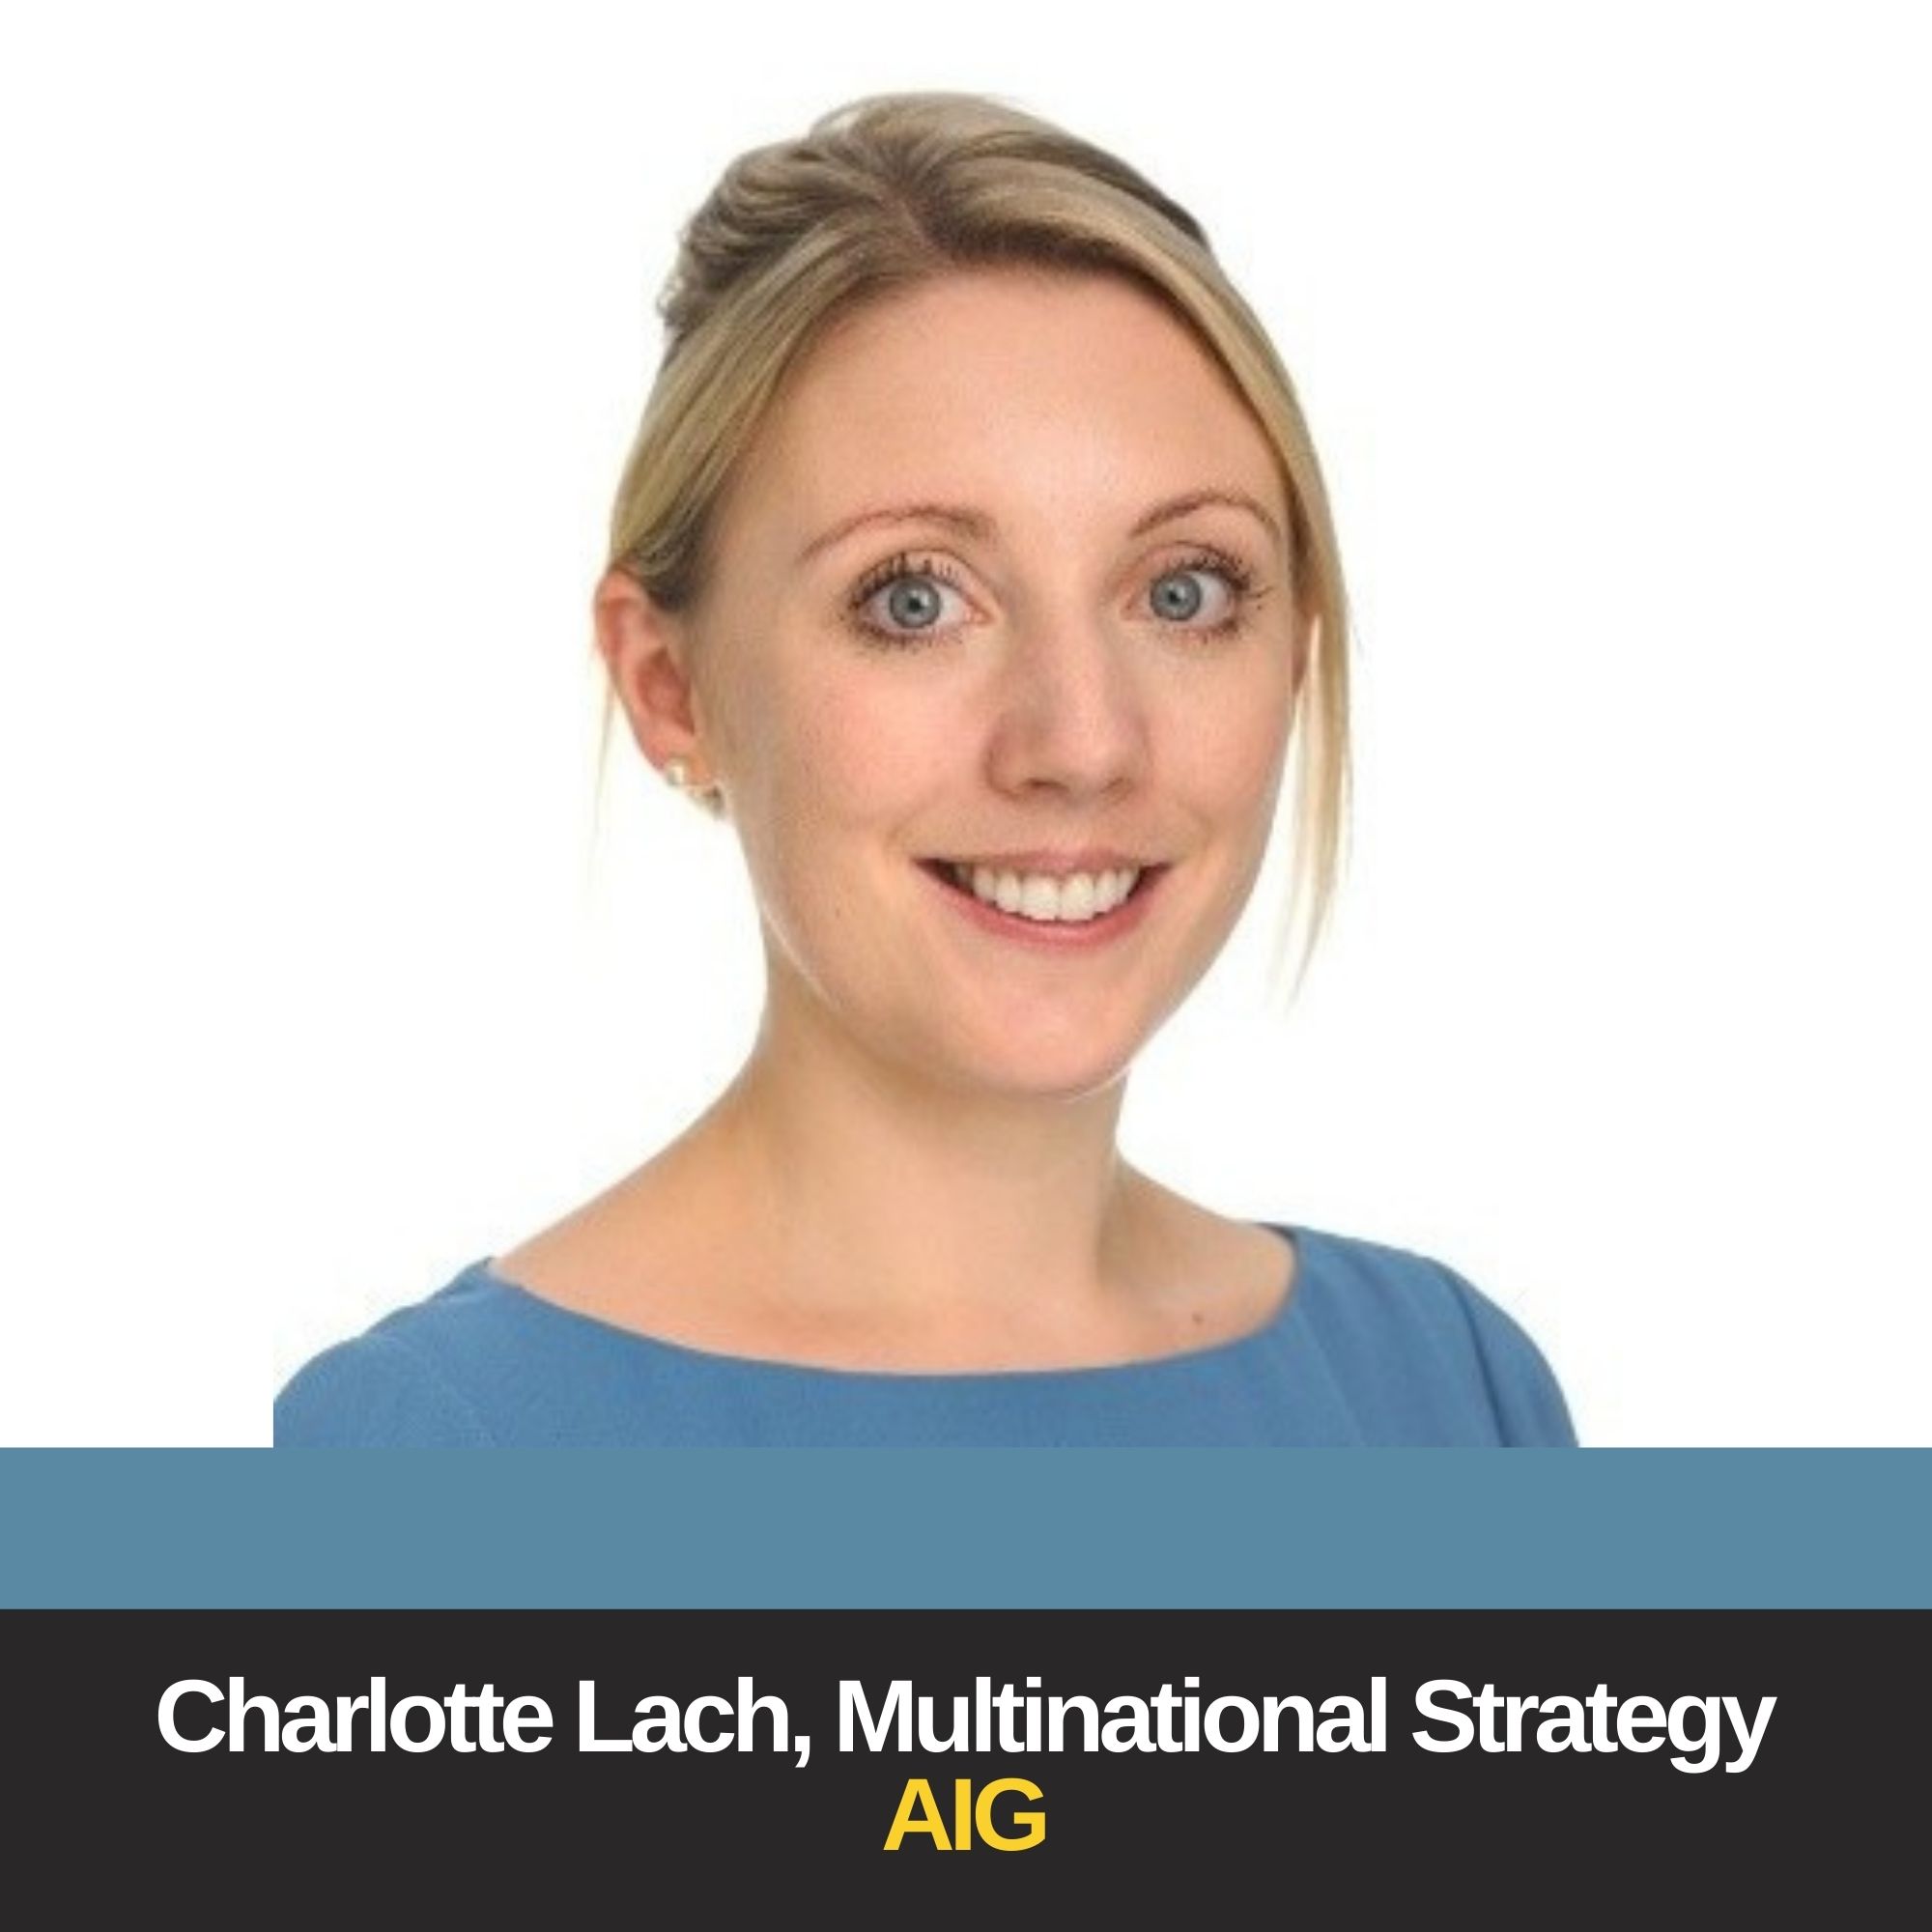 Search for Opportunity - with Charlotte Lach, Head of Global Multinational Strategy & Change at AIG